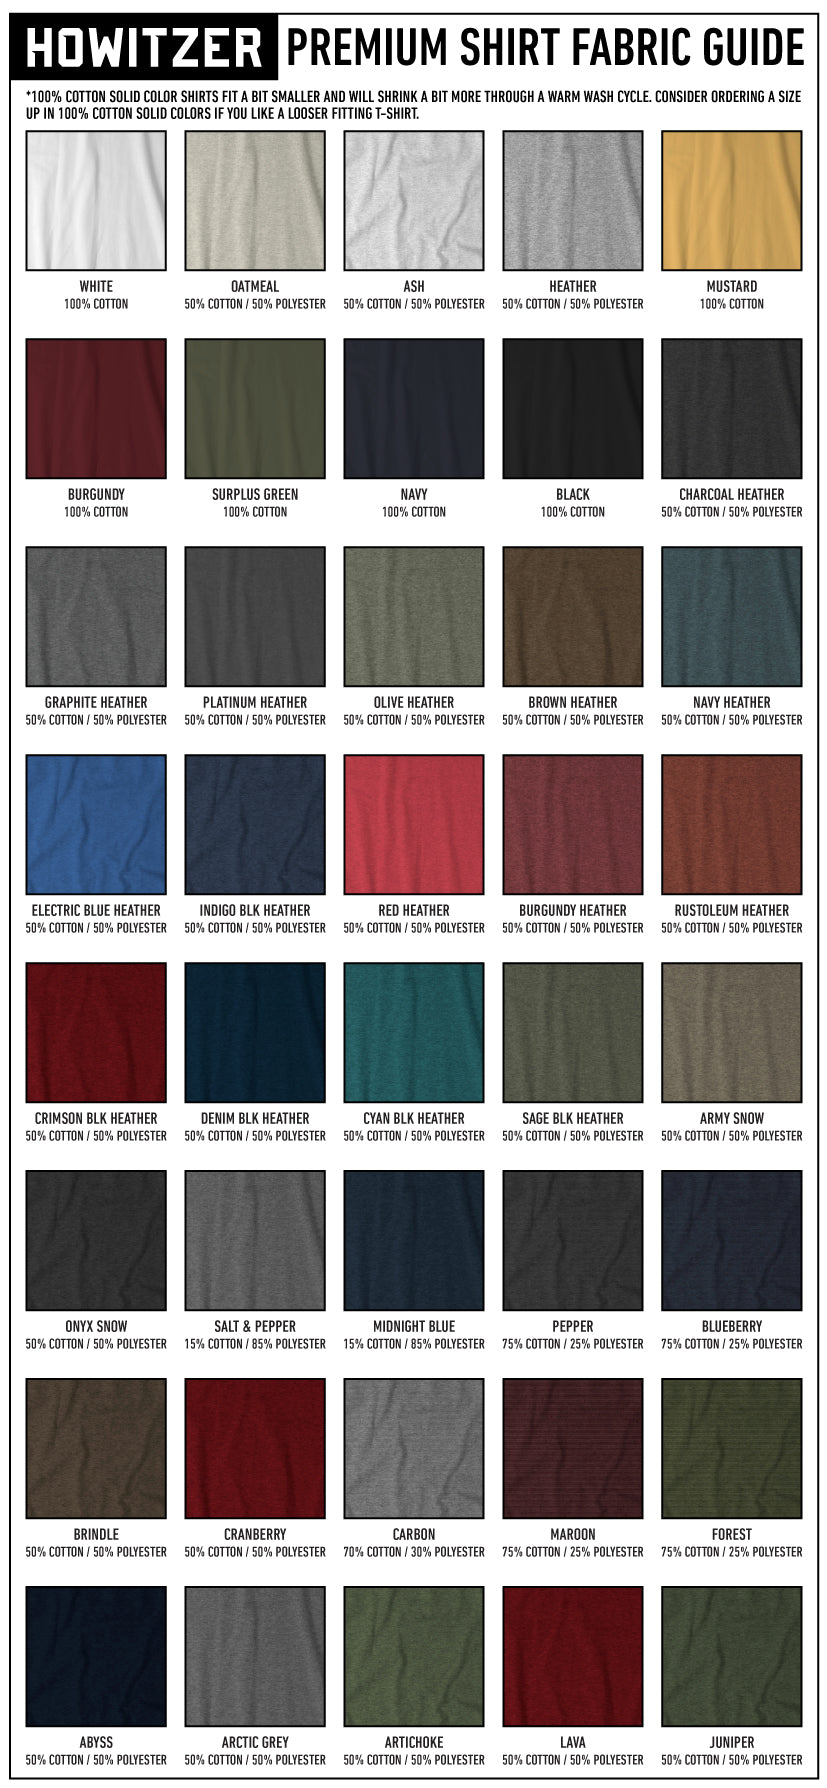 howitzer fabric guide on color blends and cotton or polyester composition